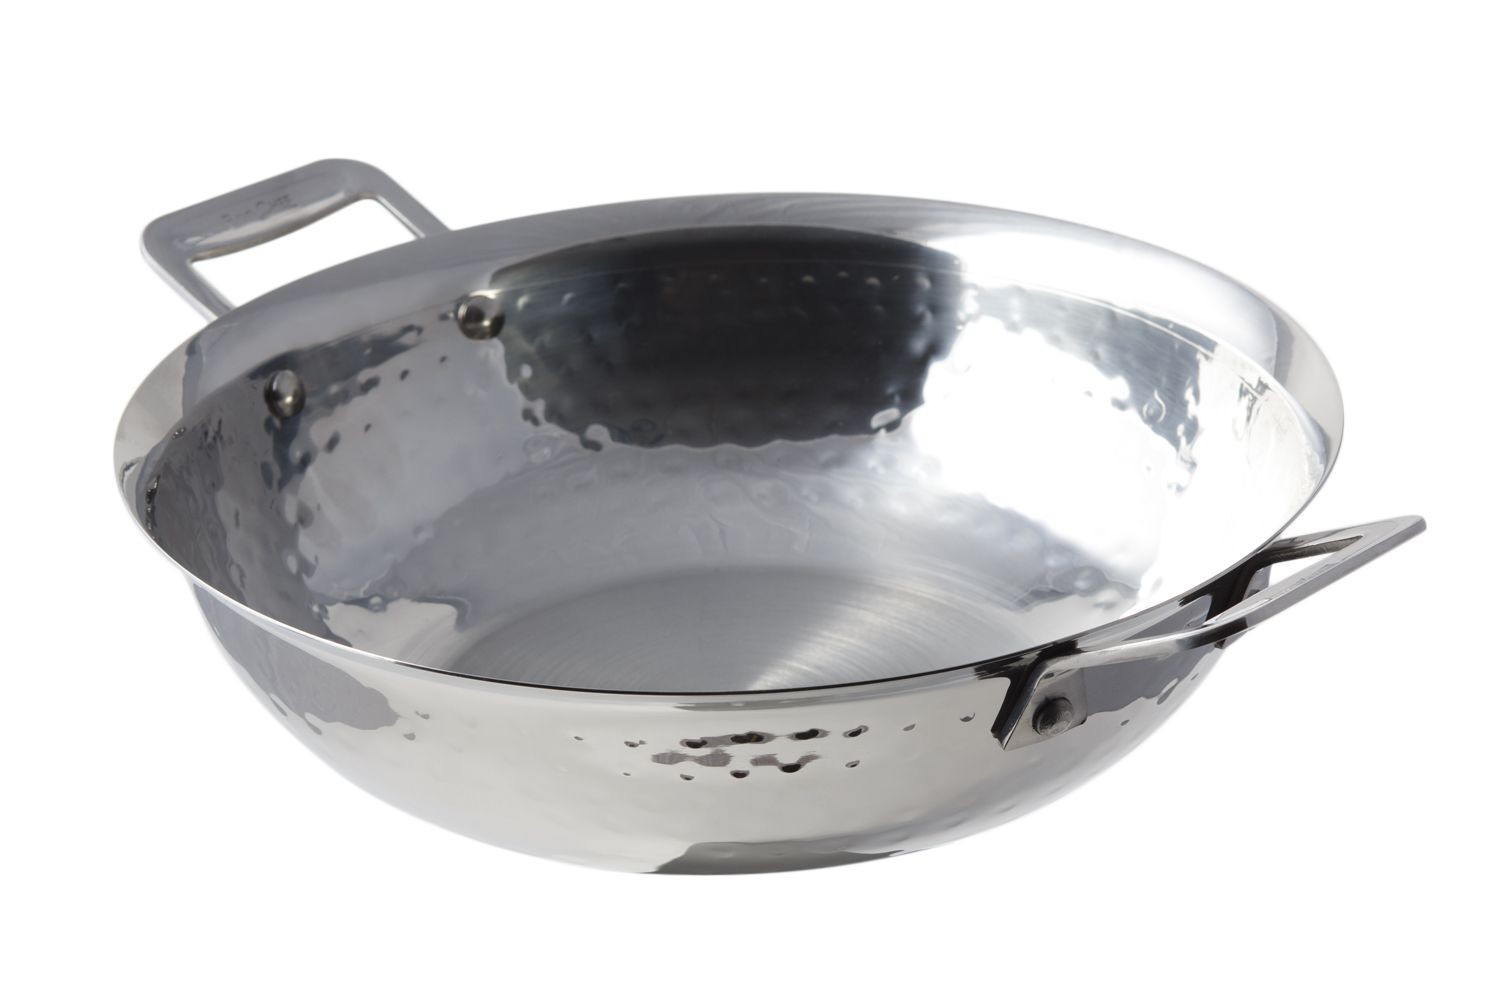 Bon Chef 60014HF Cucina Stainless Steel Stir Fry Pan, Hammered Finish, 2 1/2 Qt.